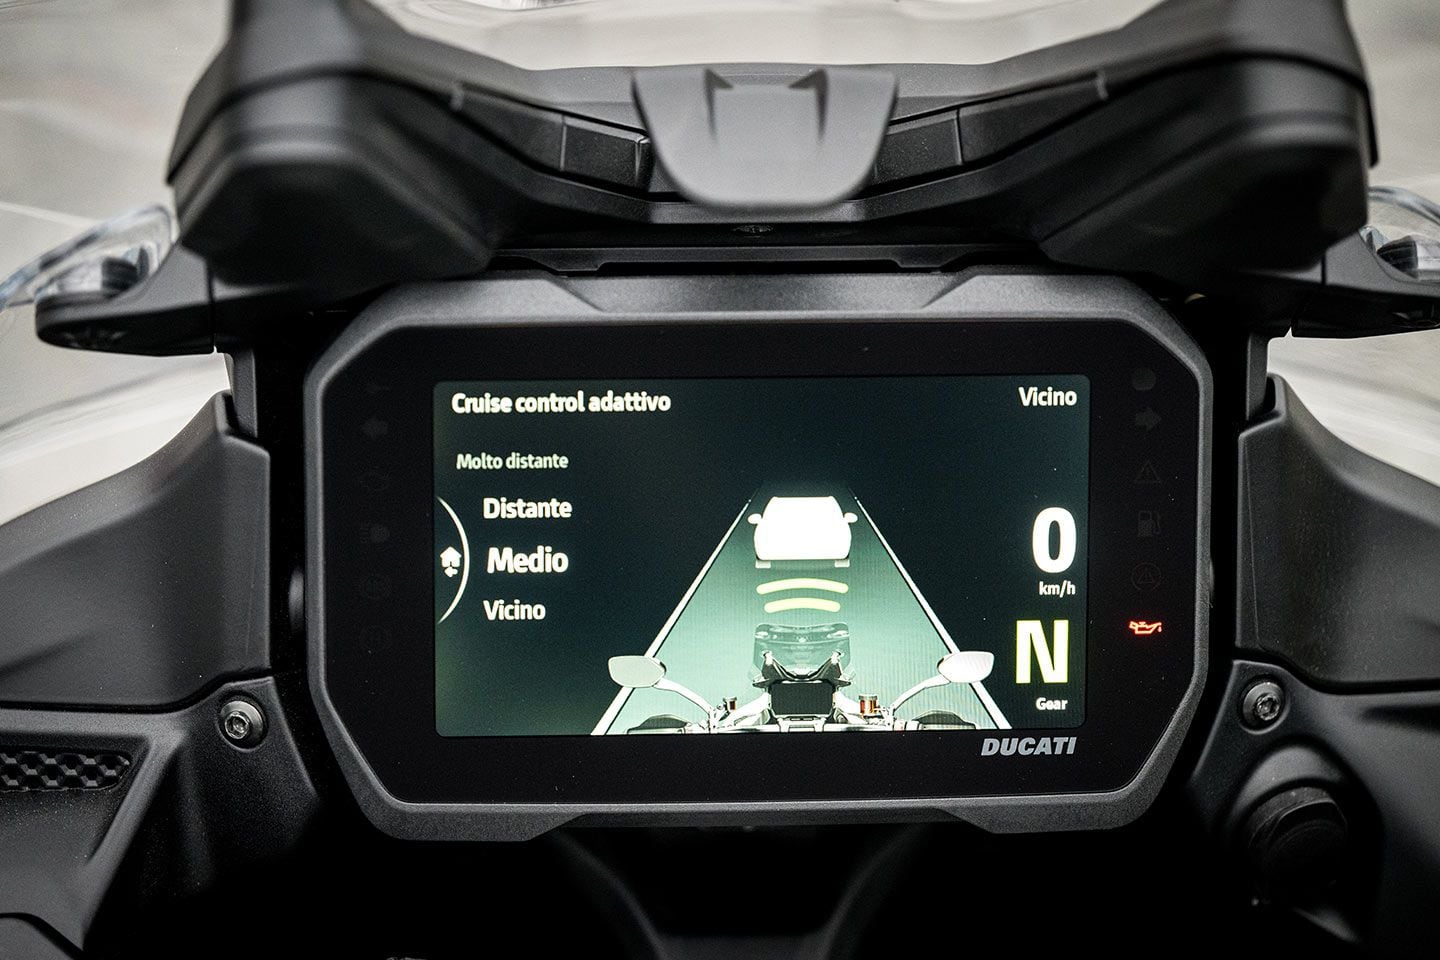 Ducati’s adaptive cruise control allows the user to set the distance to the vehicle in front of you and makes utilizing the feature so much easier. No having to disable your set speed every time you come up on another vehicle.